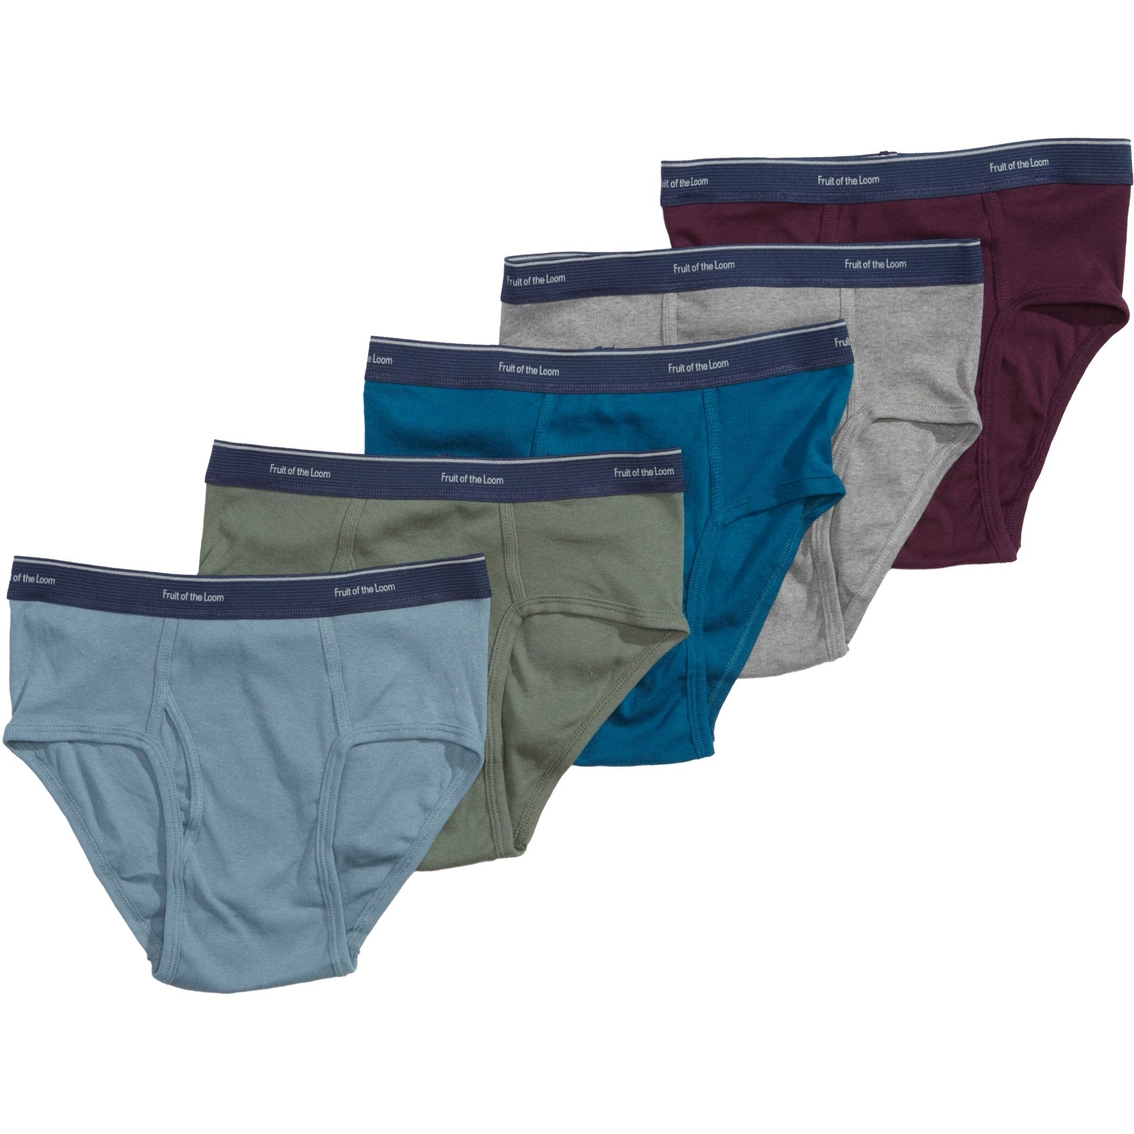 fruit-of-the-loom-men-s-5-pk-low-rise-briefs-underwear-holiday